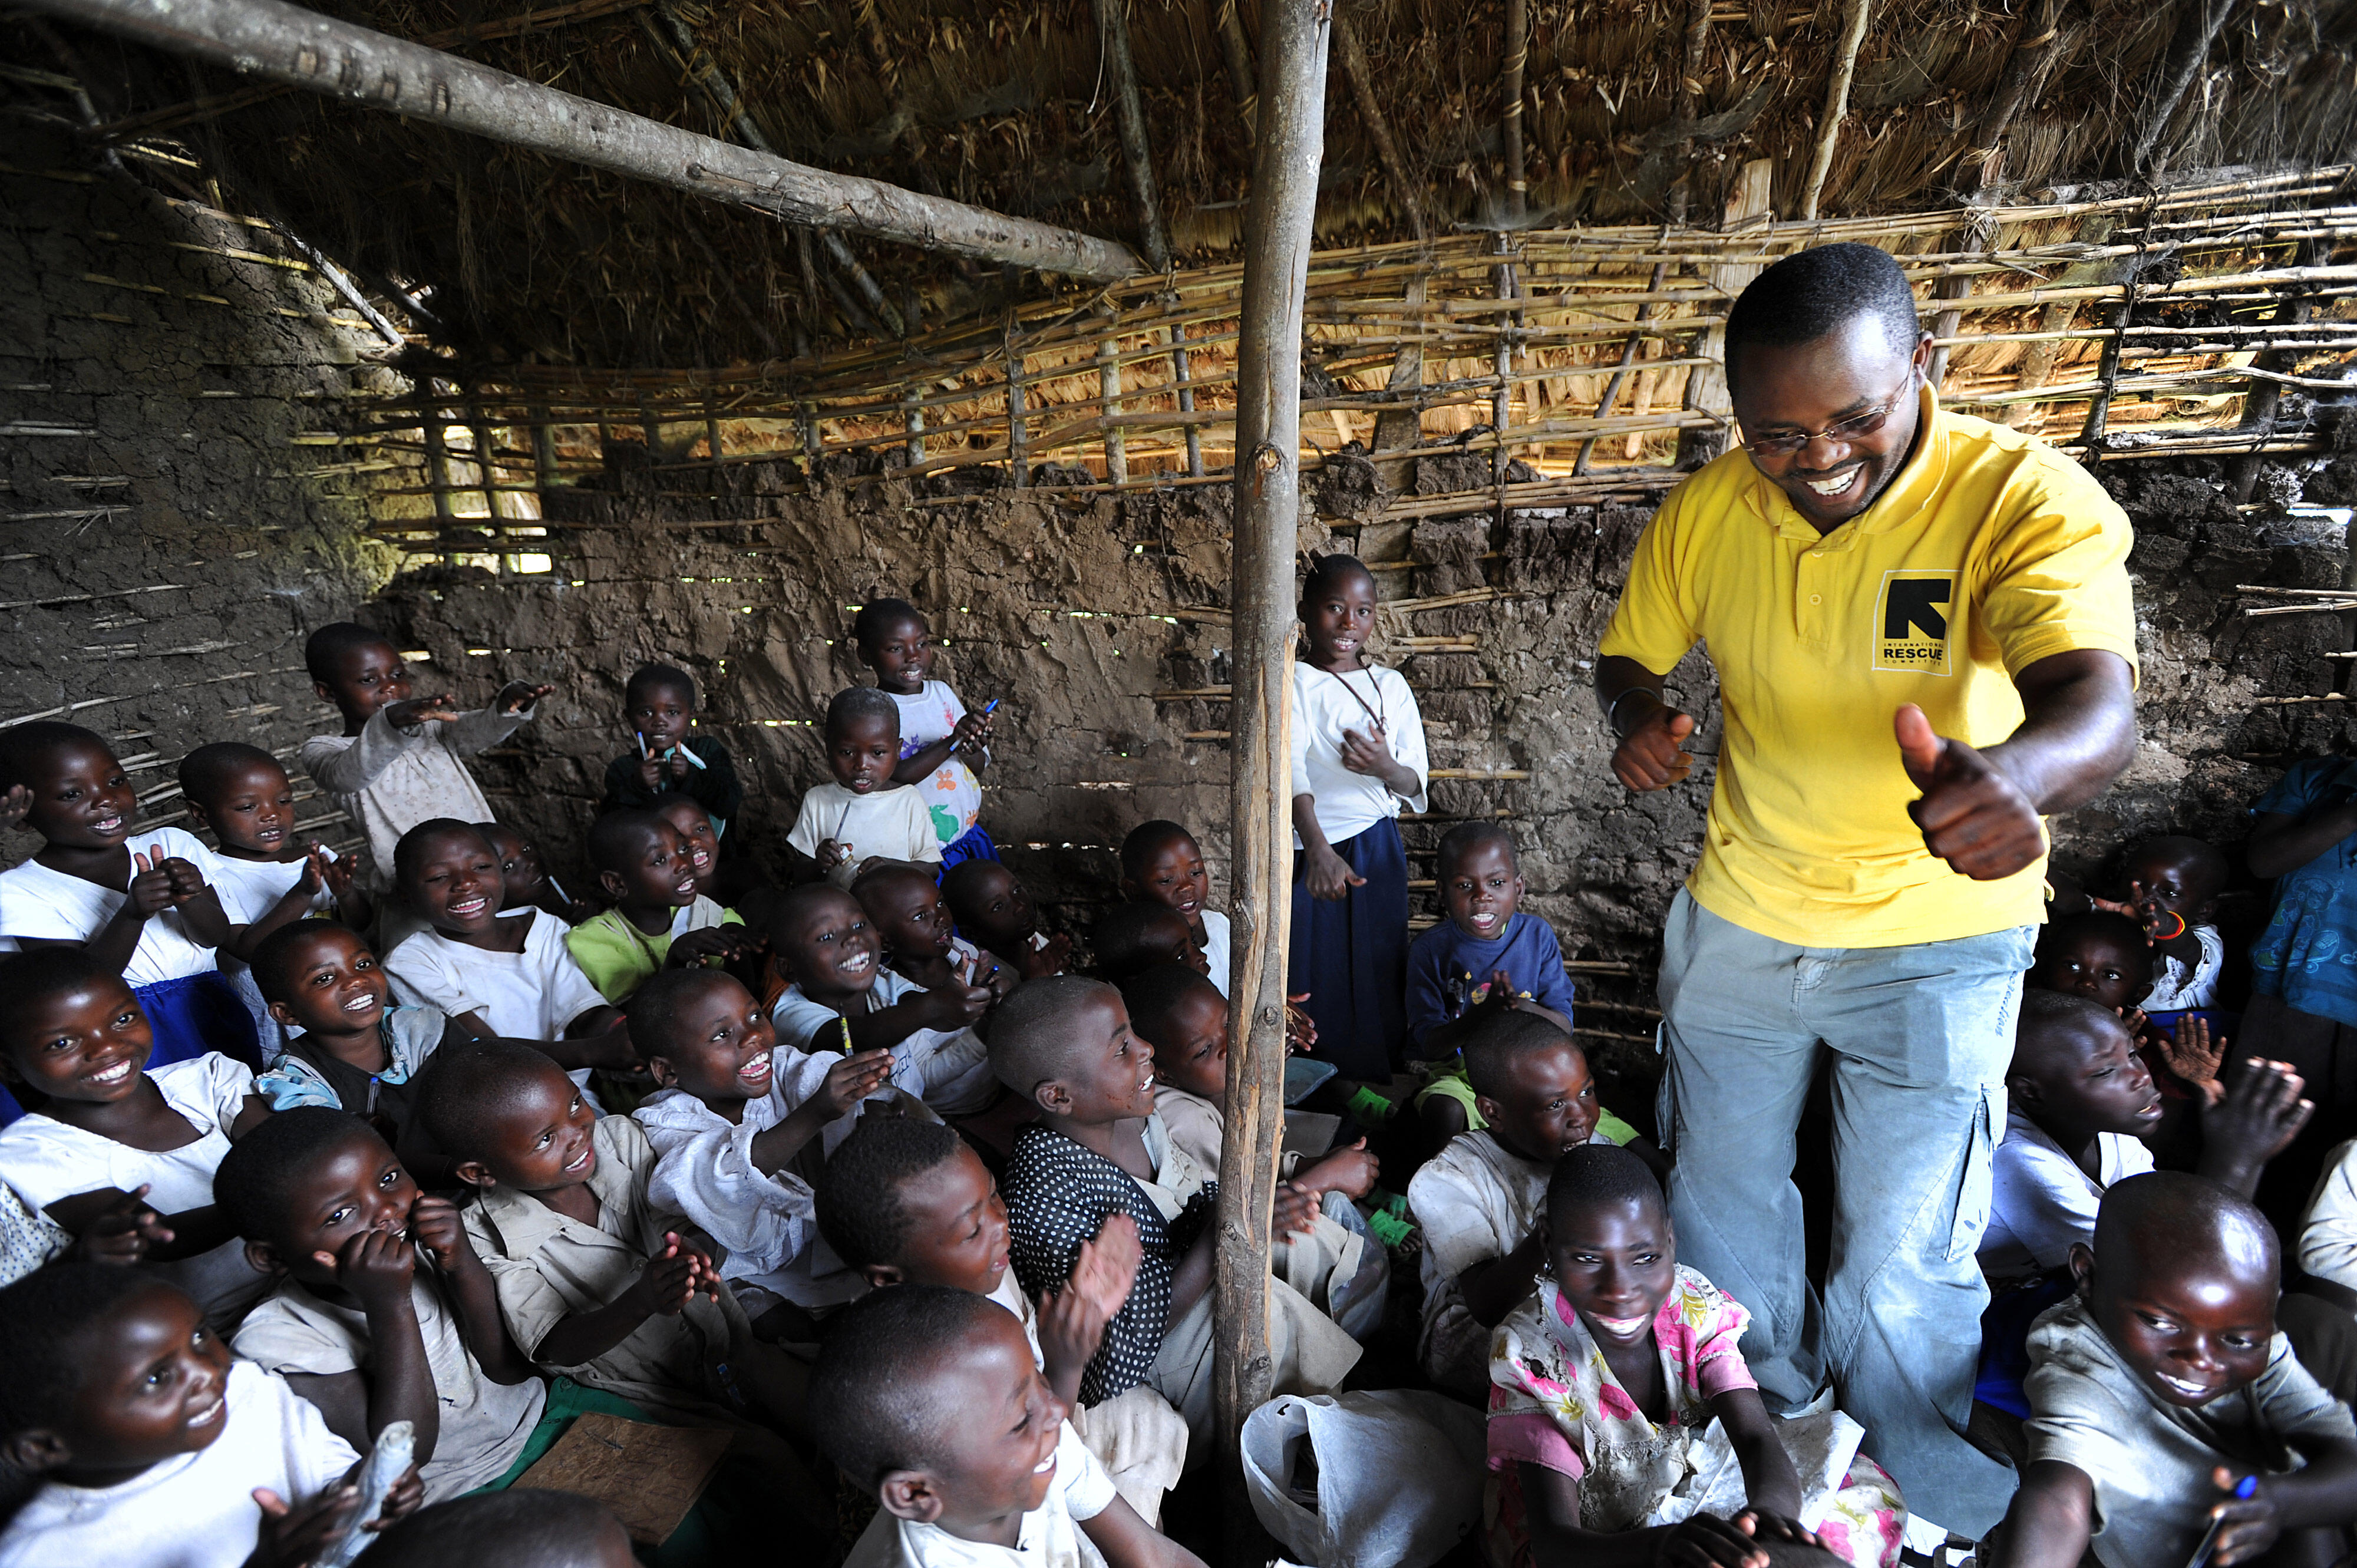 A smiling aid worker stands amidst a classroom of children, leading them in a song